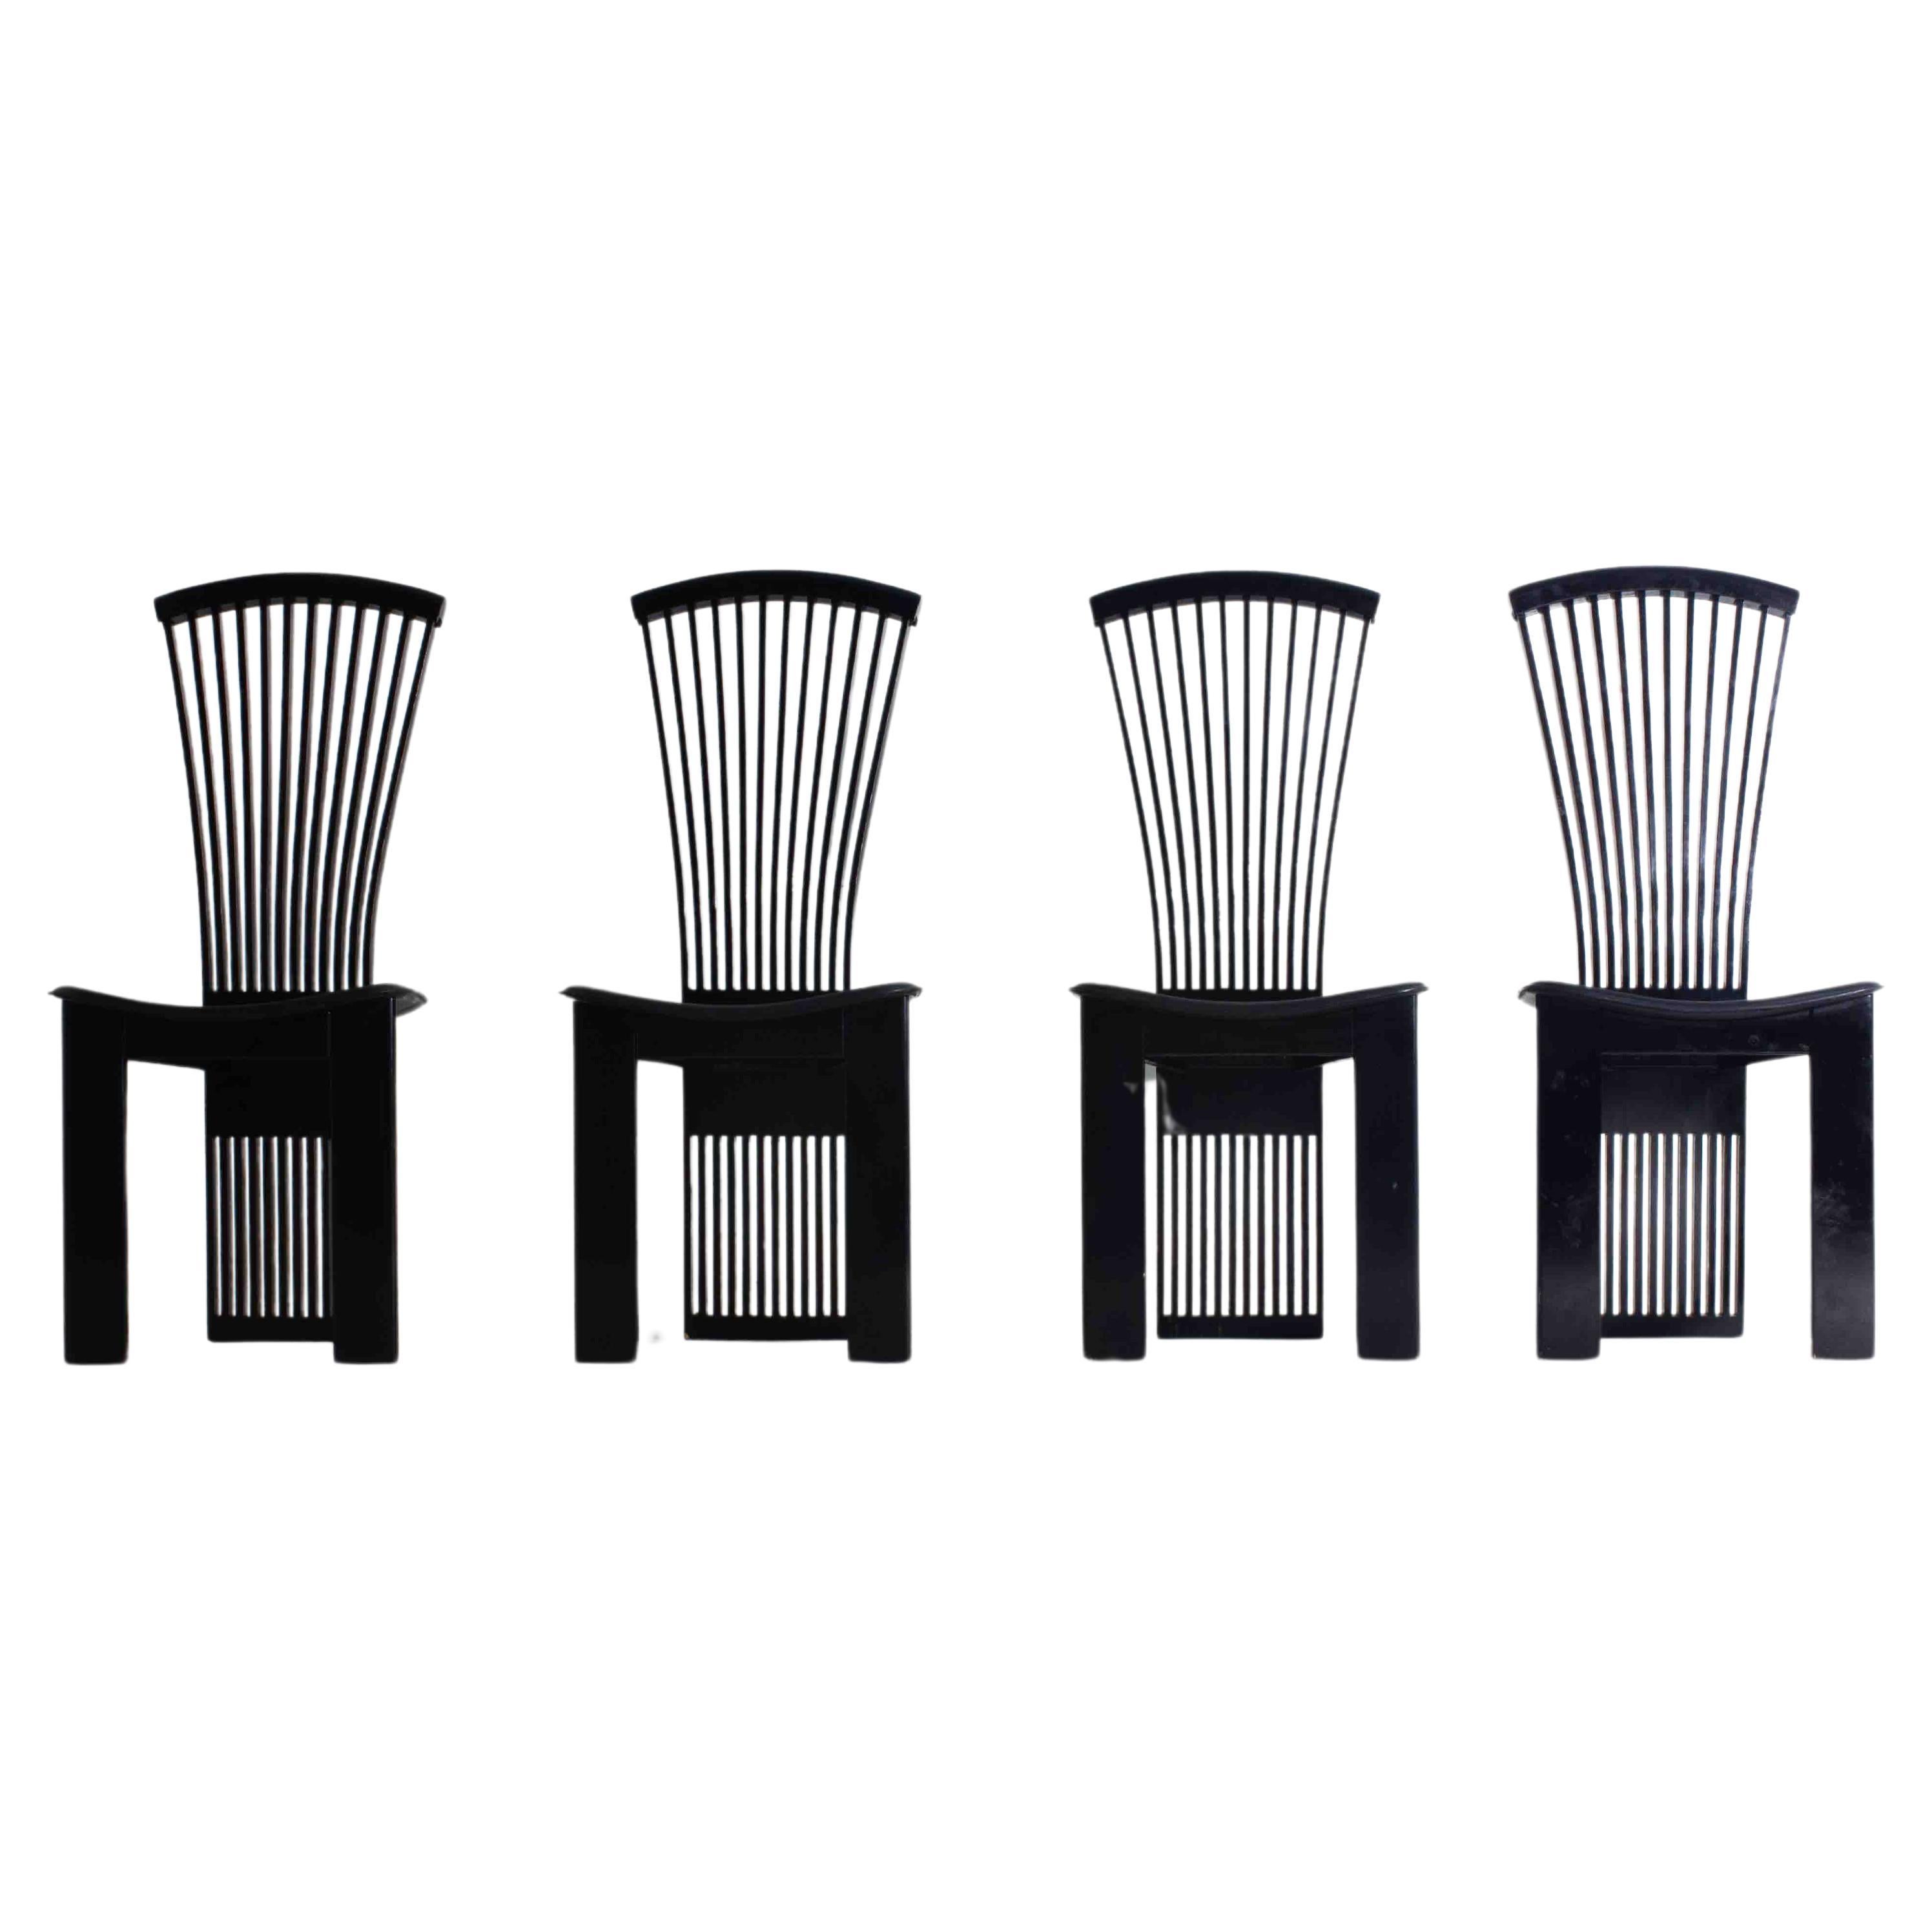 Set of postmodern 'Fan' chairs by Pietro Costantini, Italy 1980s